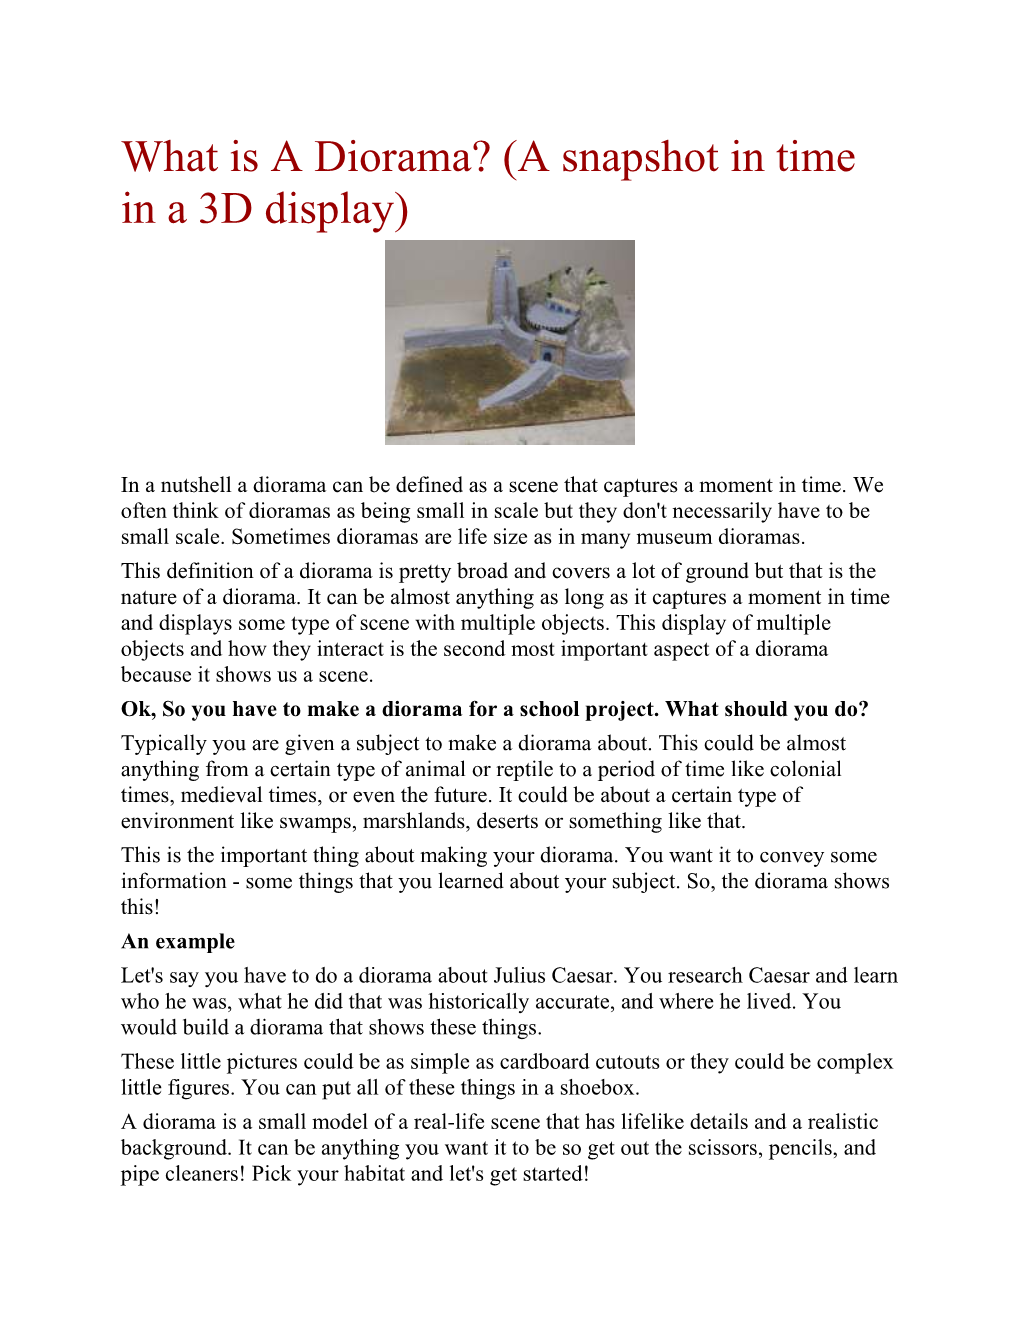 What Is a Diorama? (A Snapshot in Time in a 3D Display)